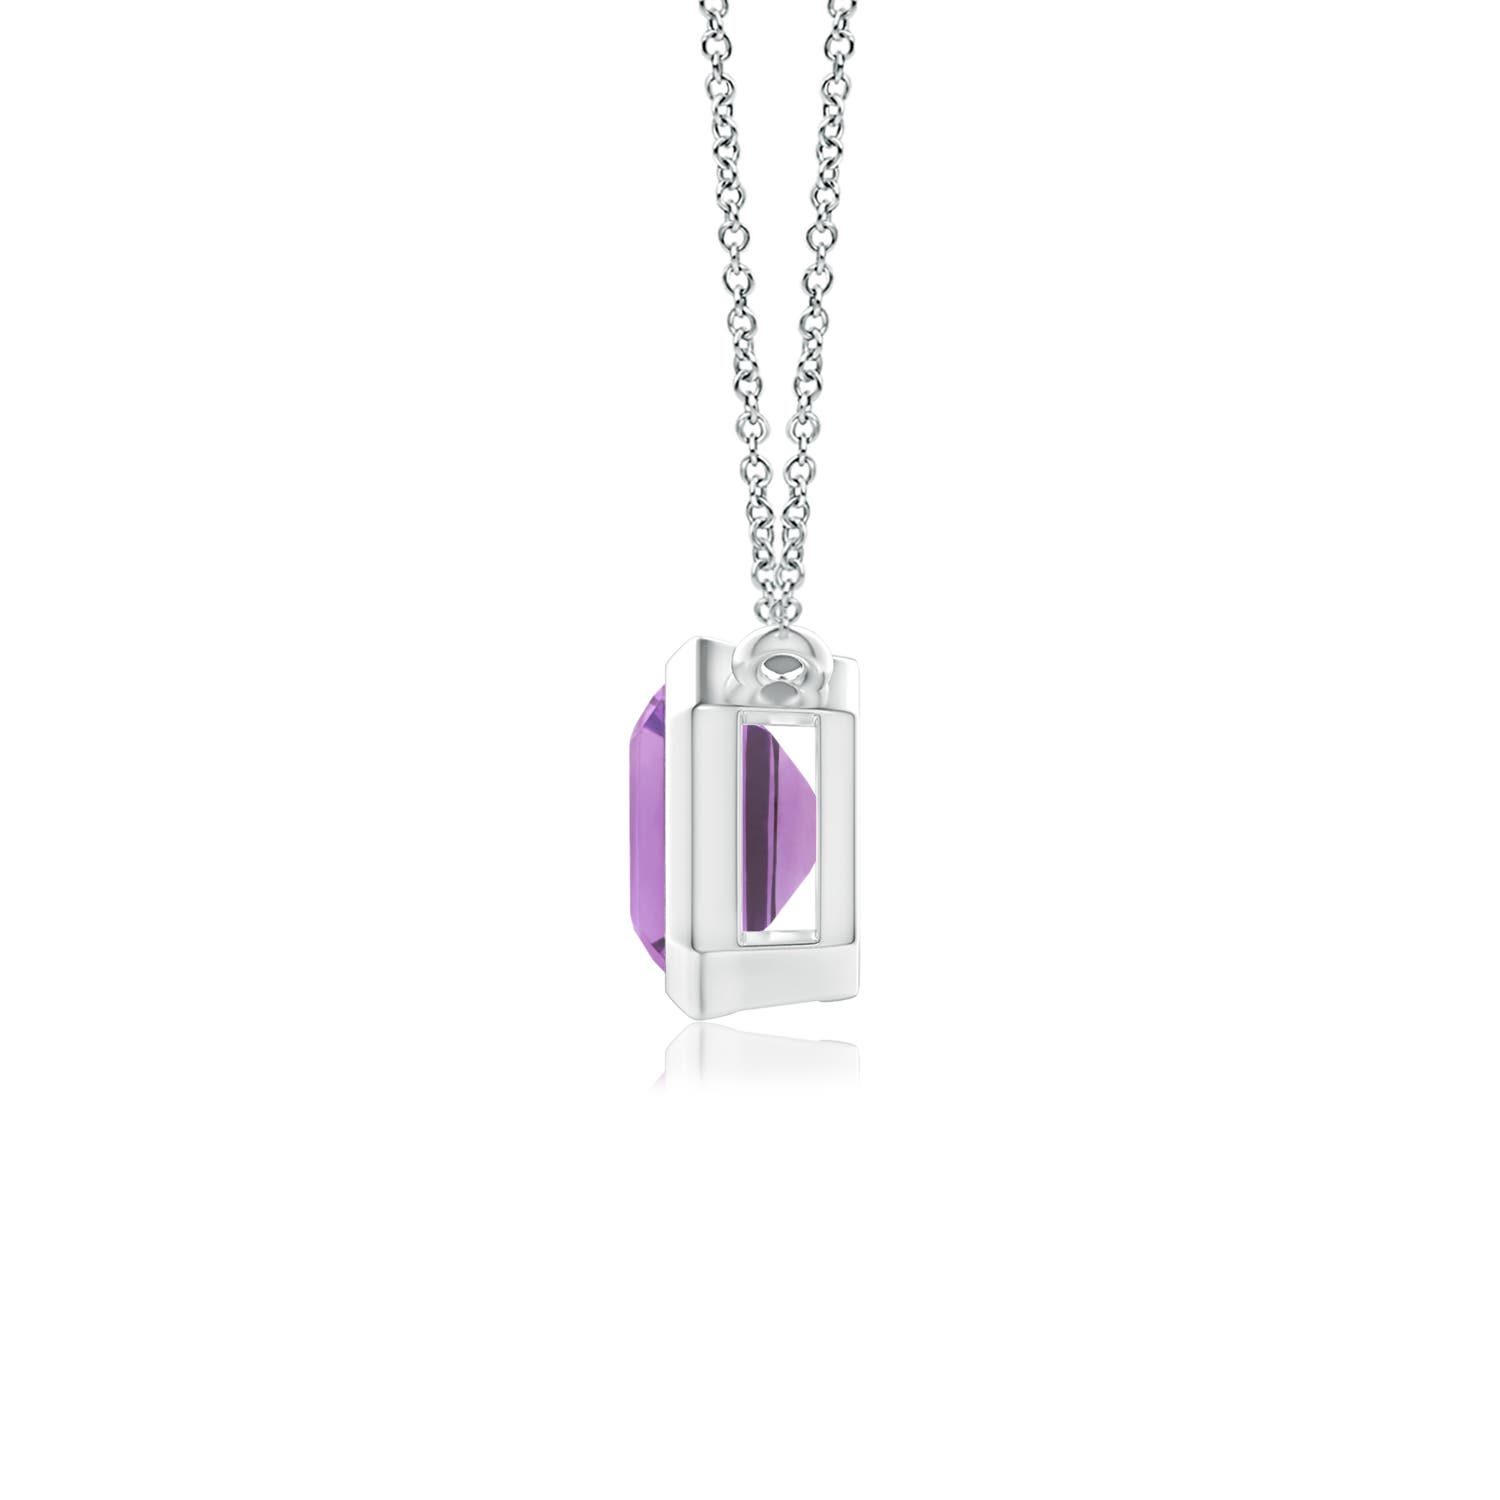 A - Amethyst / 1.5 CT / 14 KT White Gold